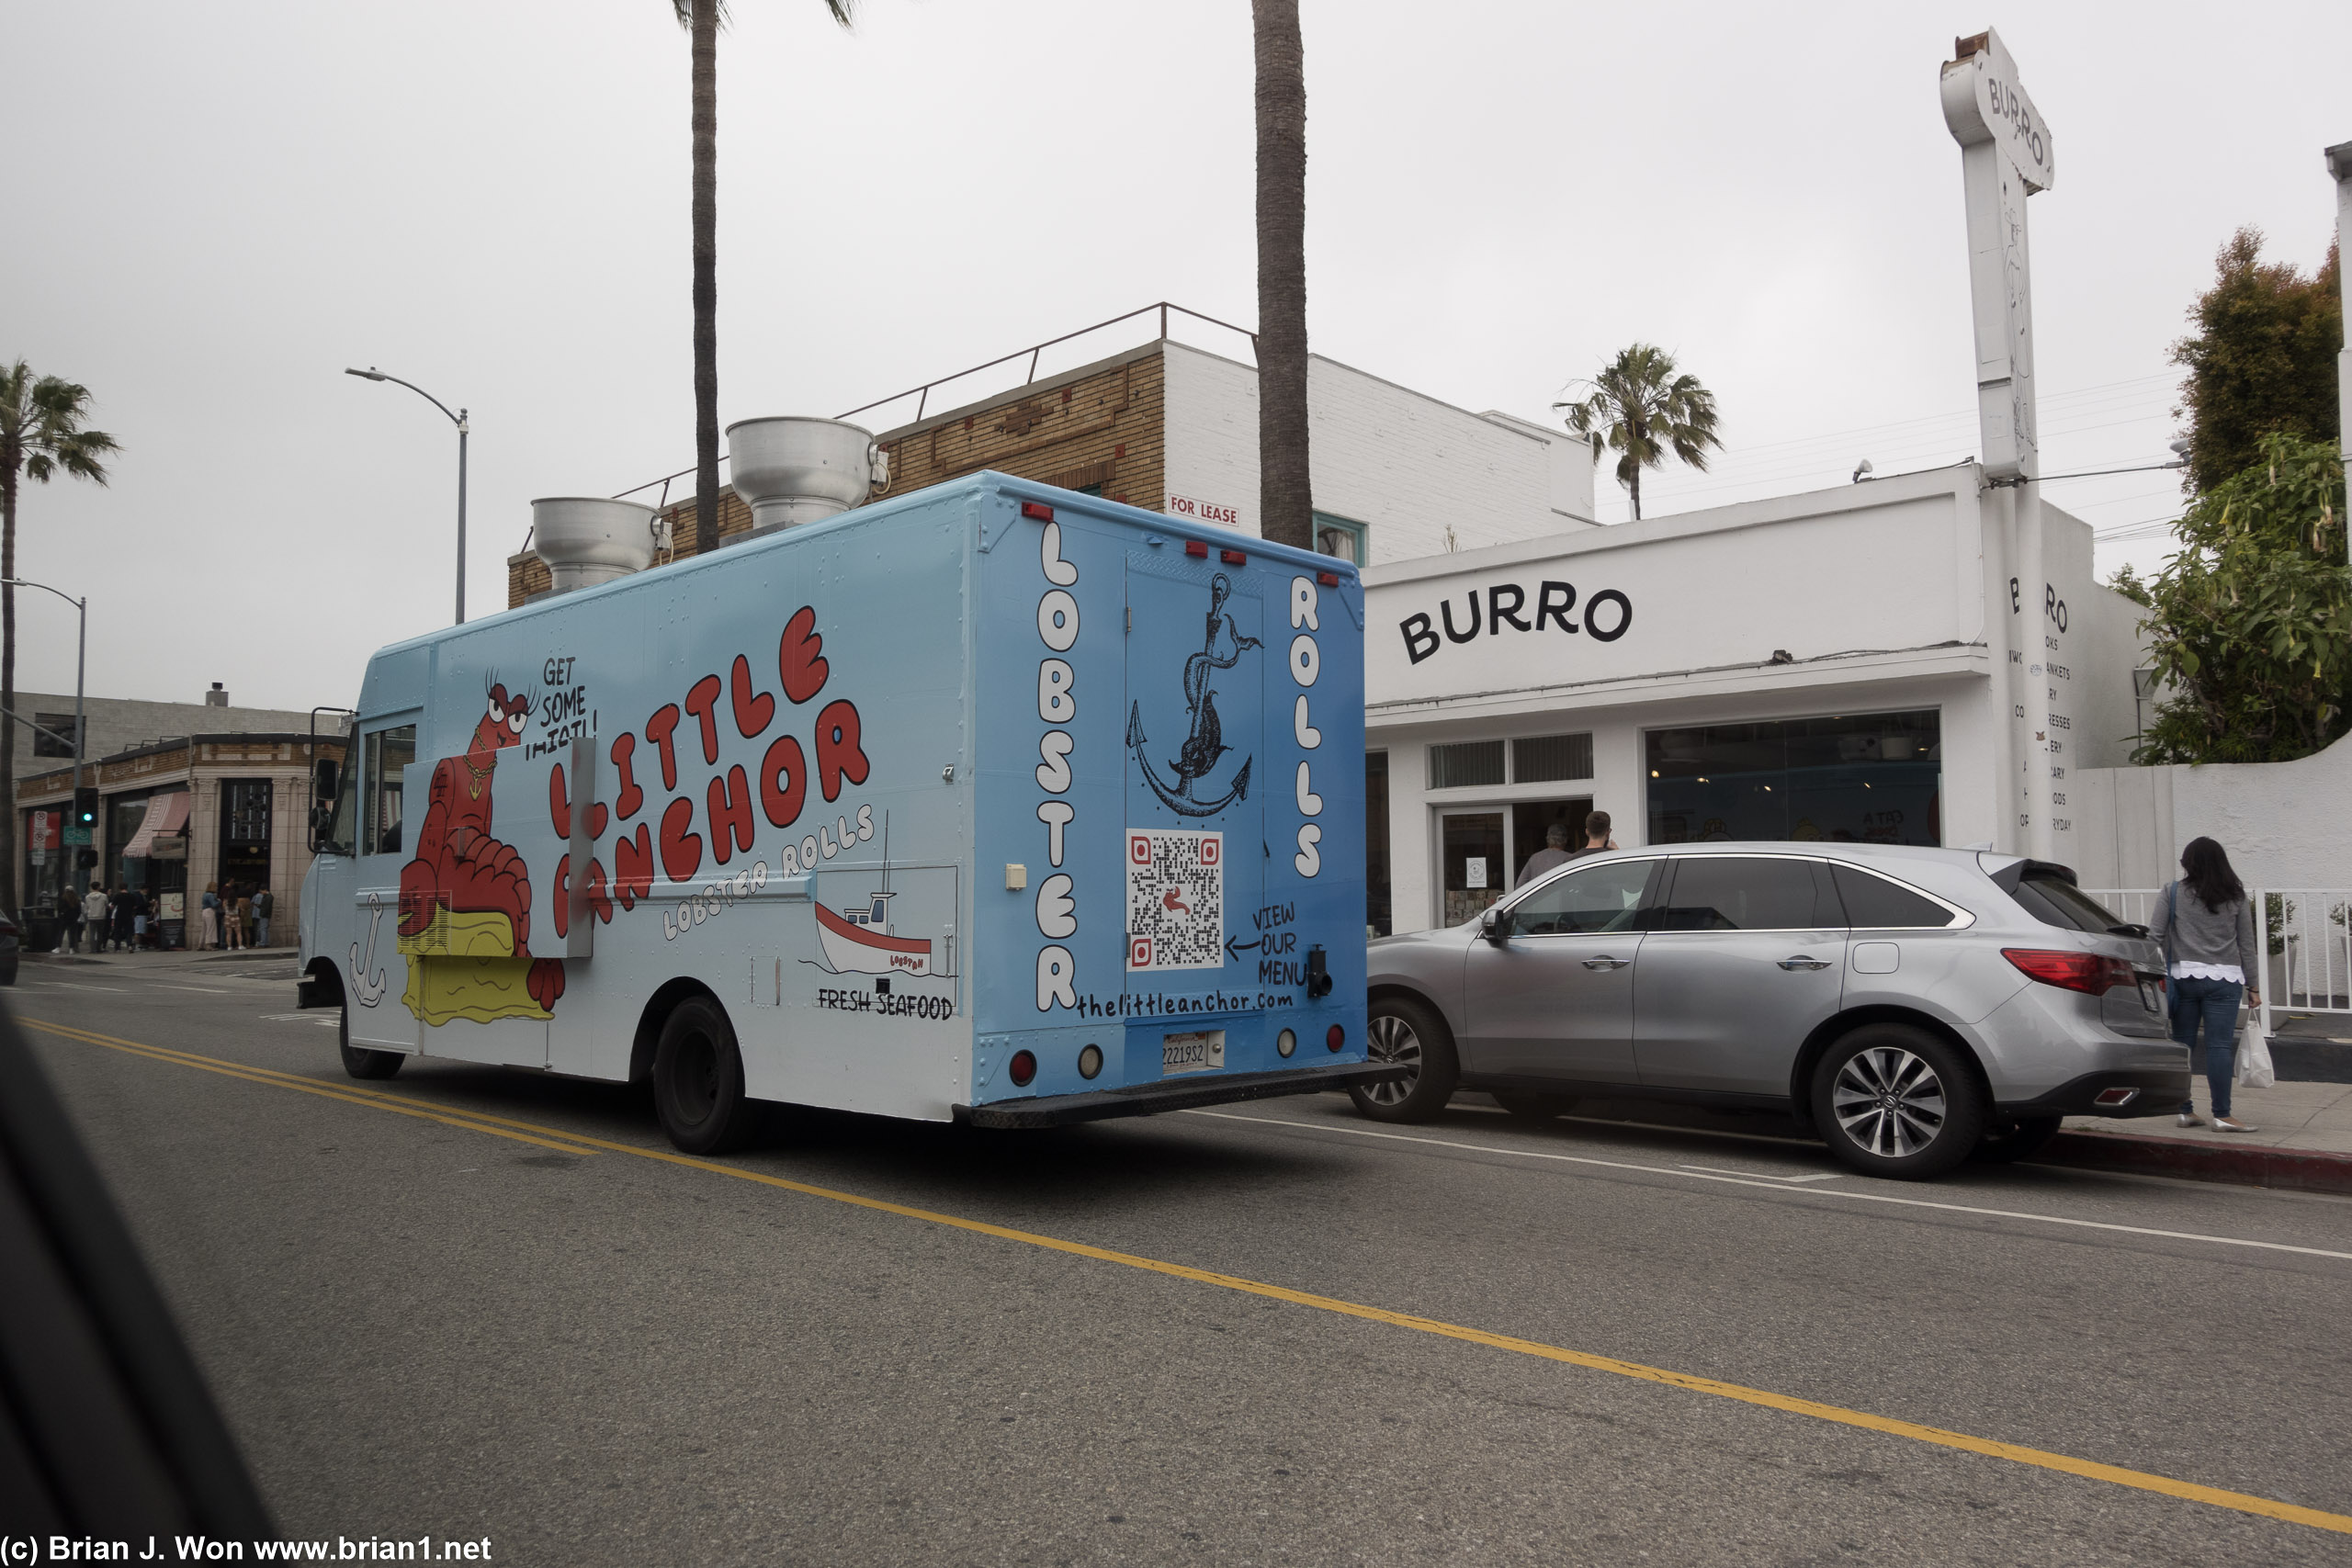 Speaking of newly famous food trucks, The Little Anchor driving by.